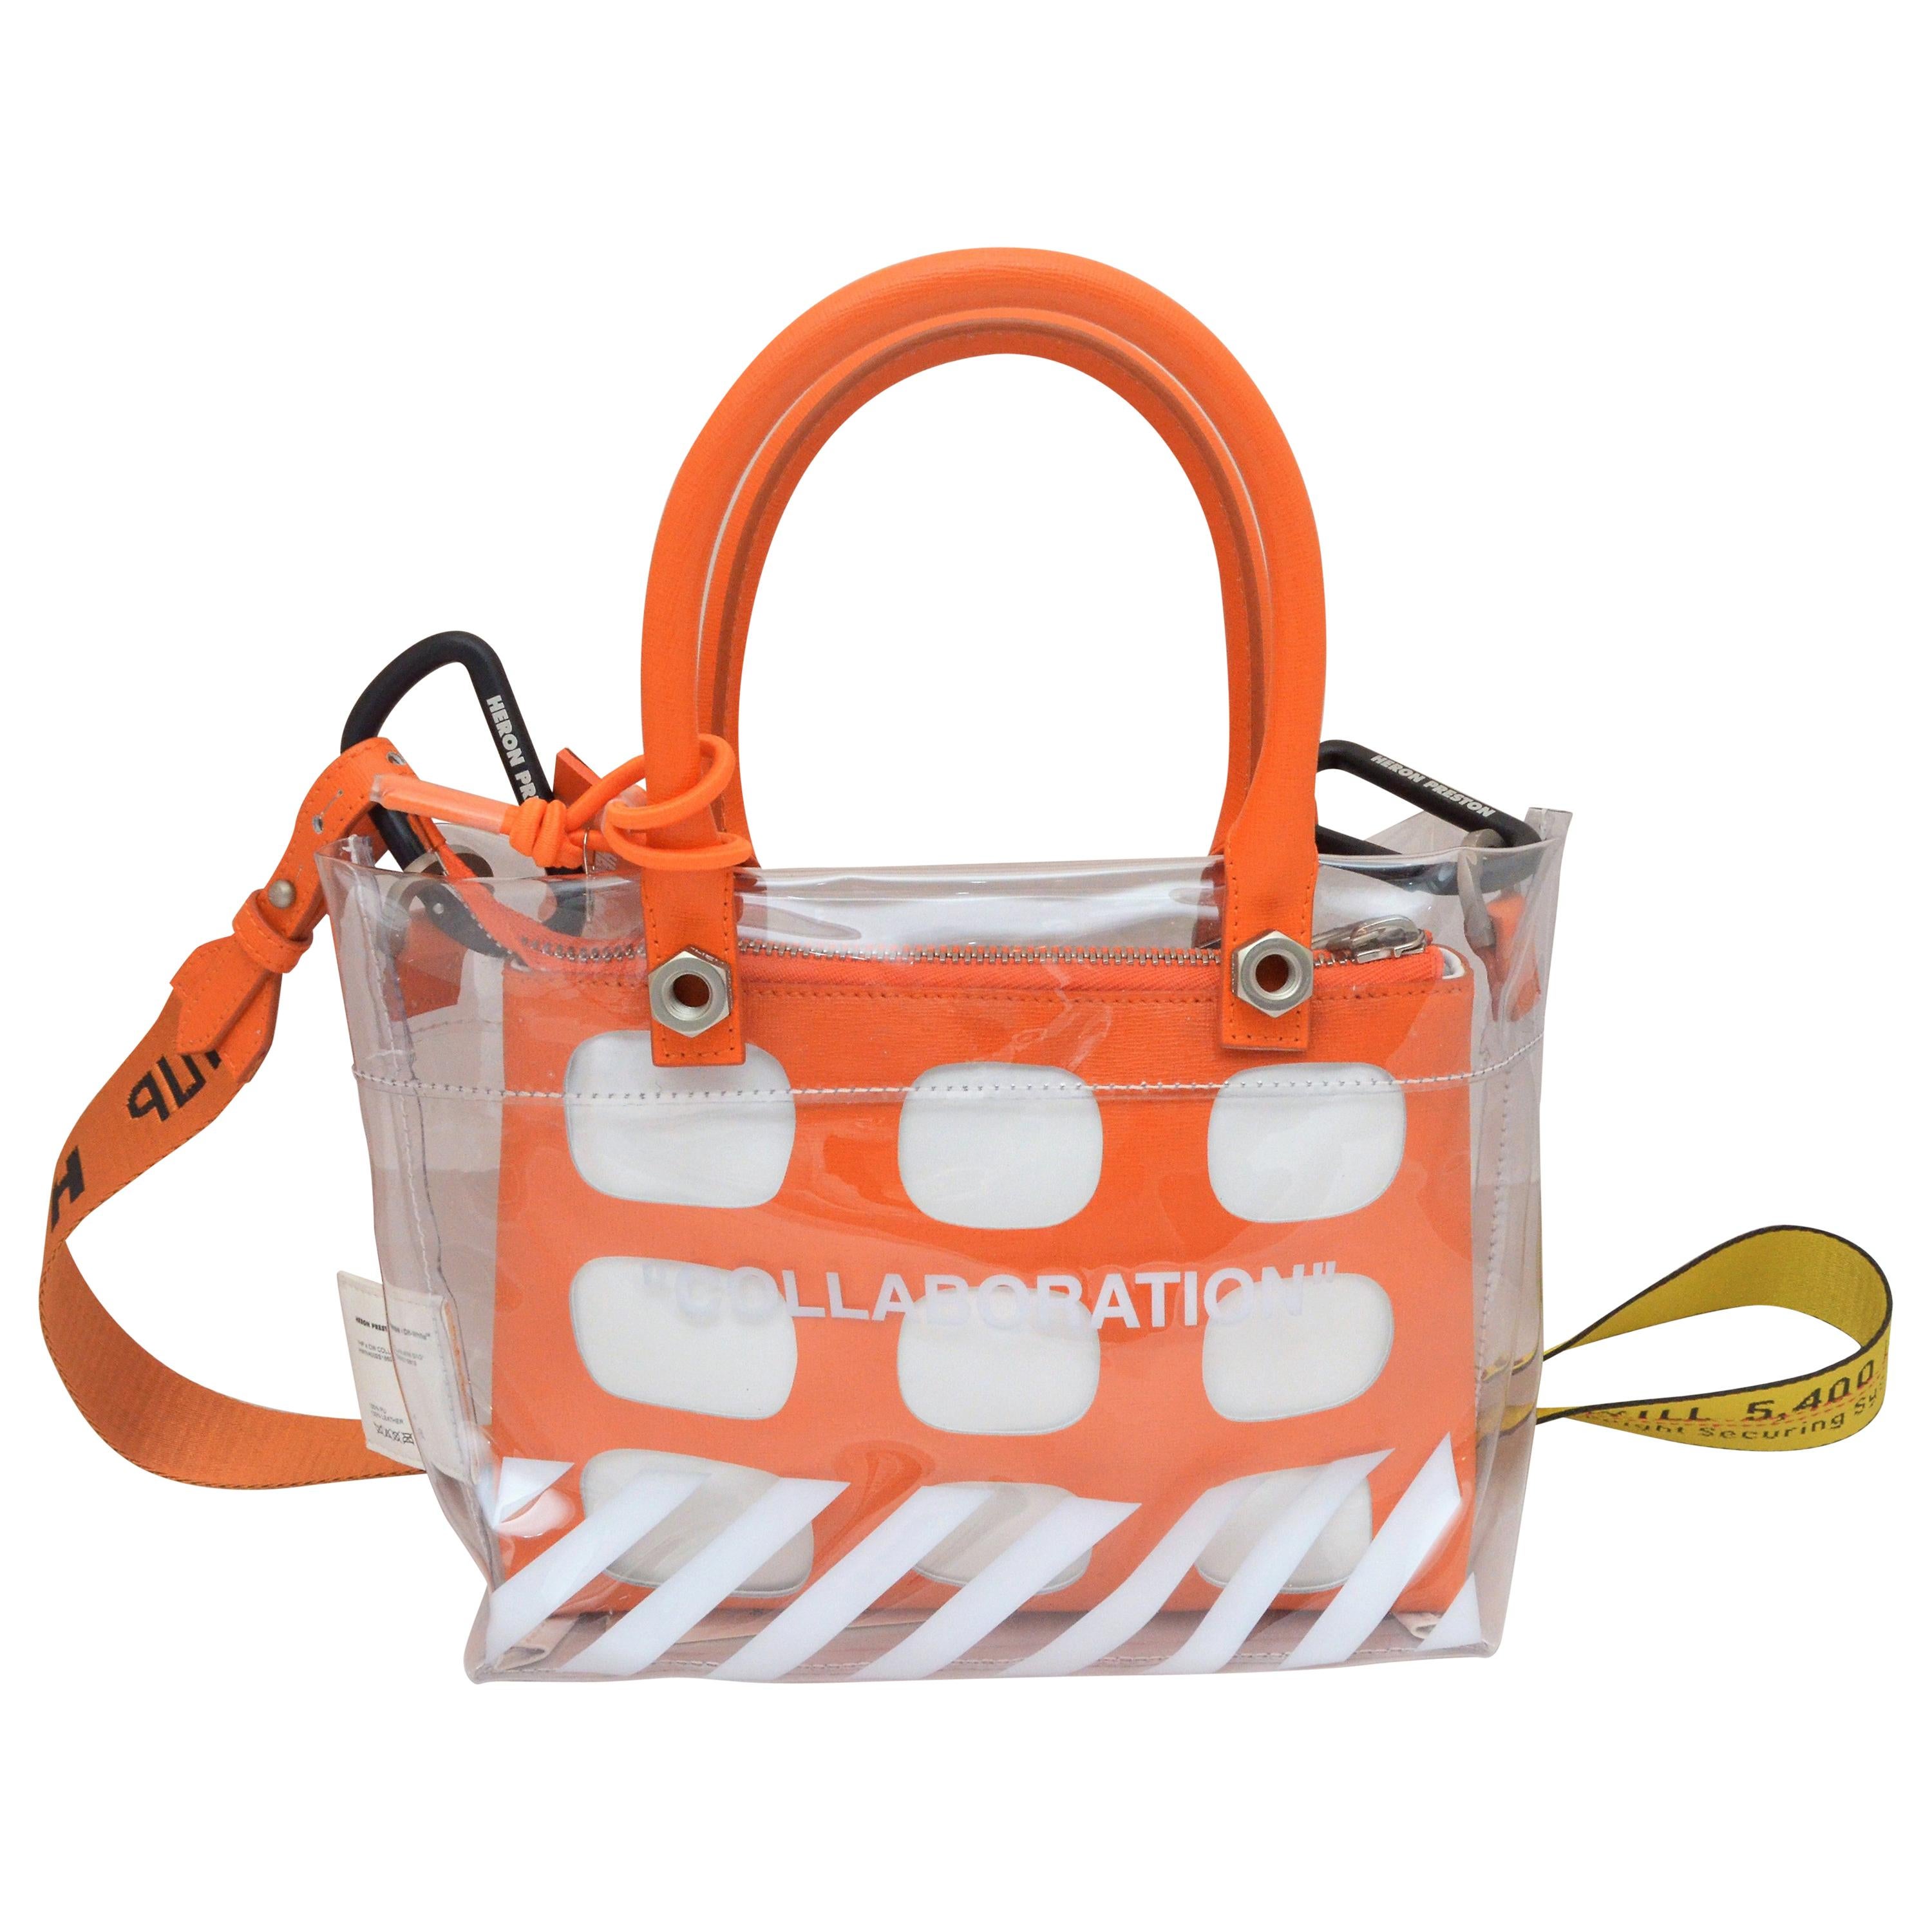 Off White x Heron Preston Collaboration Tote Bag with Industrial Shoulder Strap